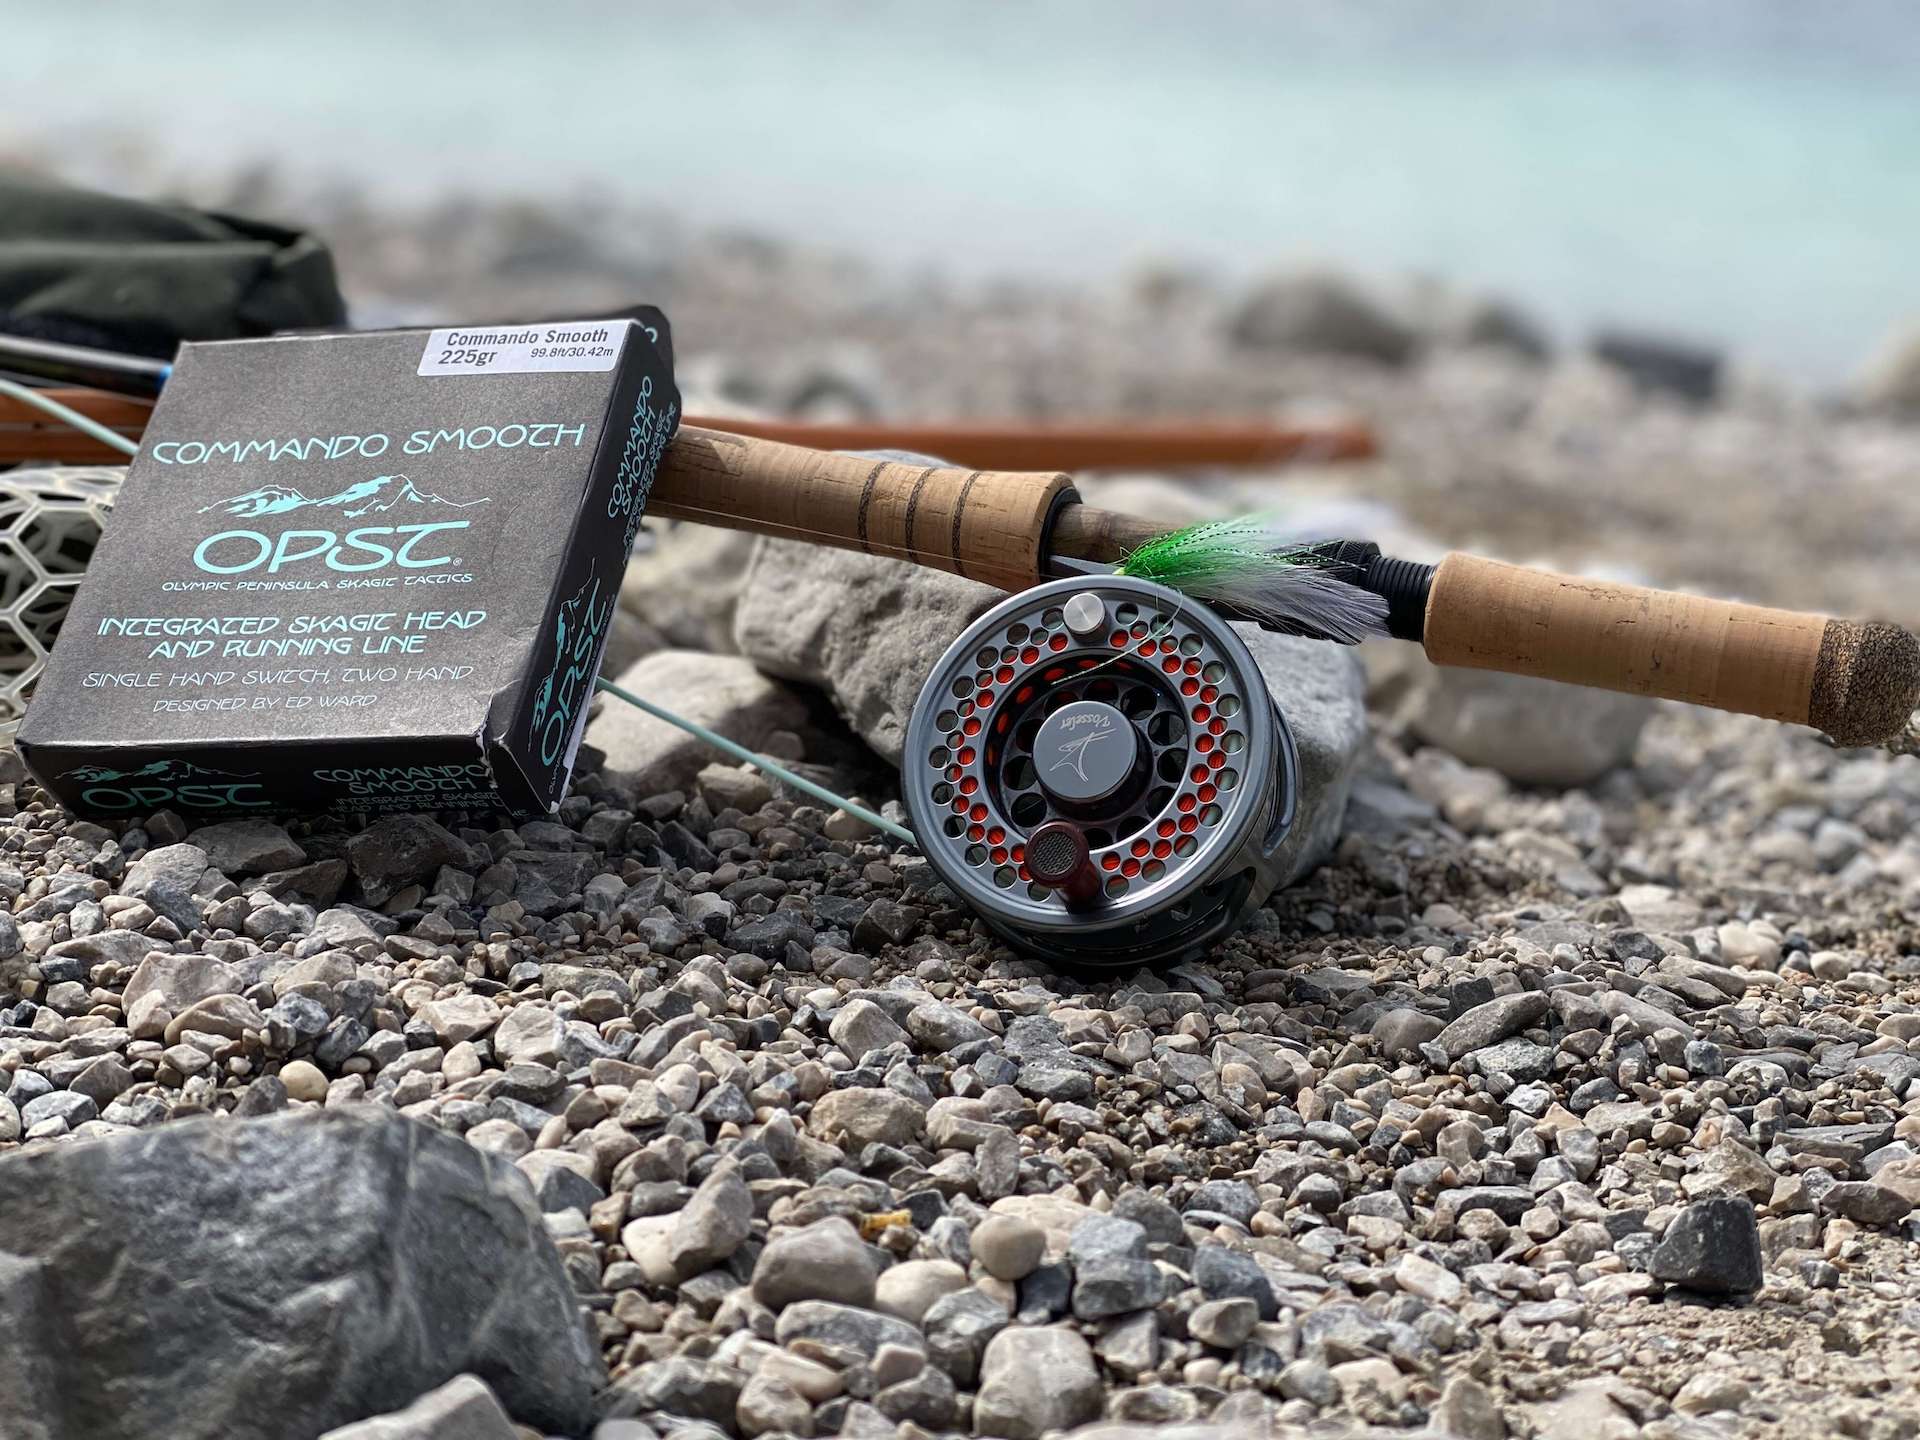 HANDS ON: OPST COMMANDO SMOOTH & MICRO SKAGIT ROD